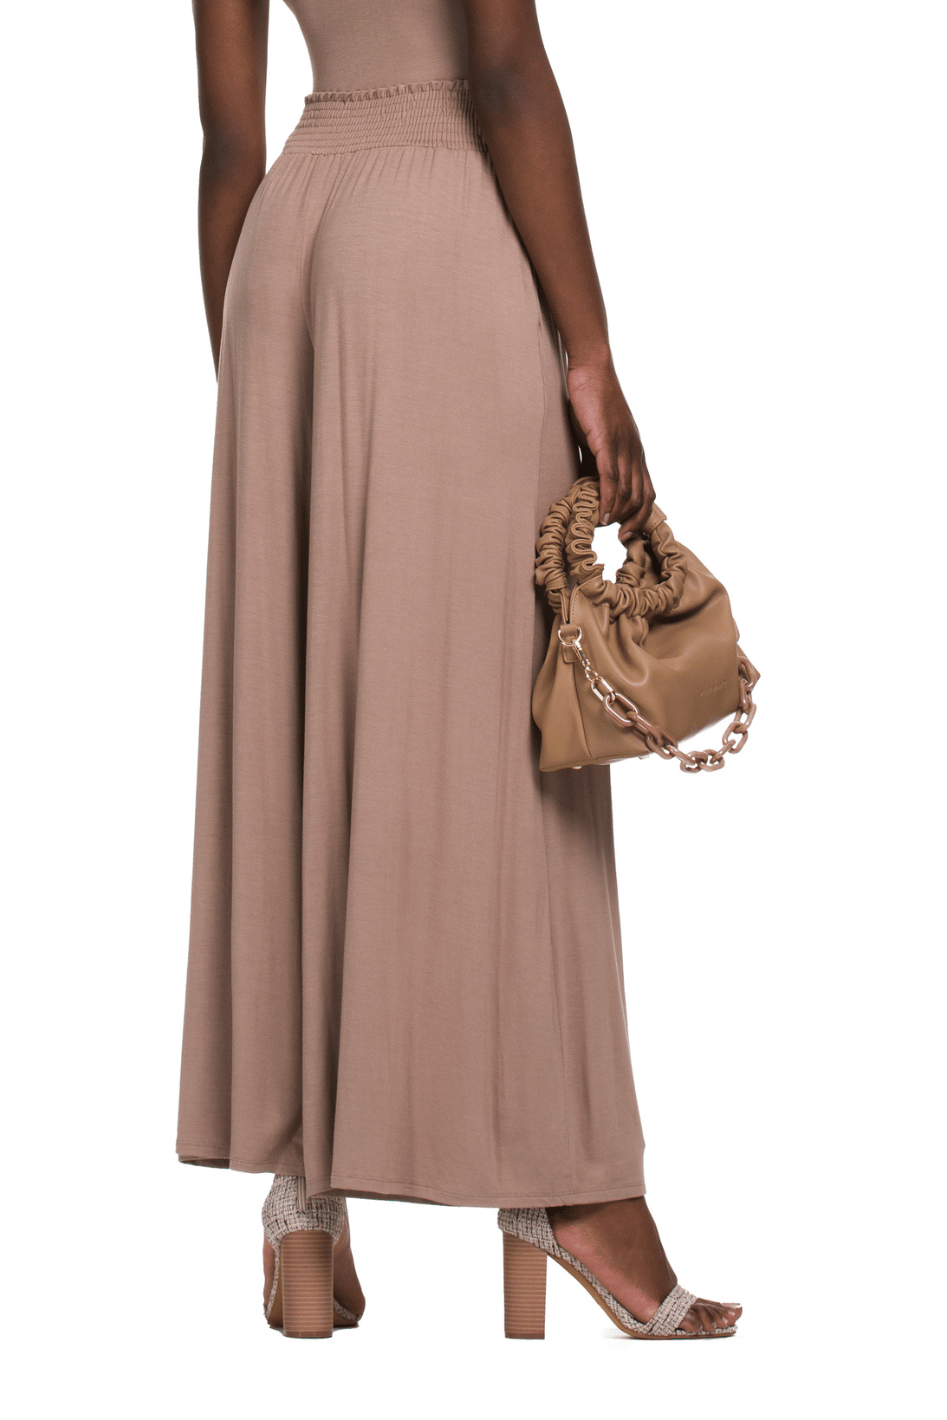 The Spellbound Bamboo Maxi Palazzo Ankle Length Pants - Expressive Collective CO.